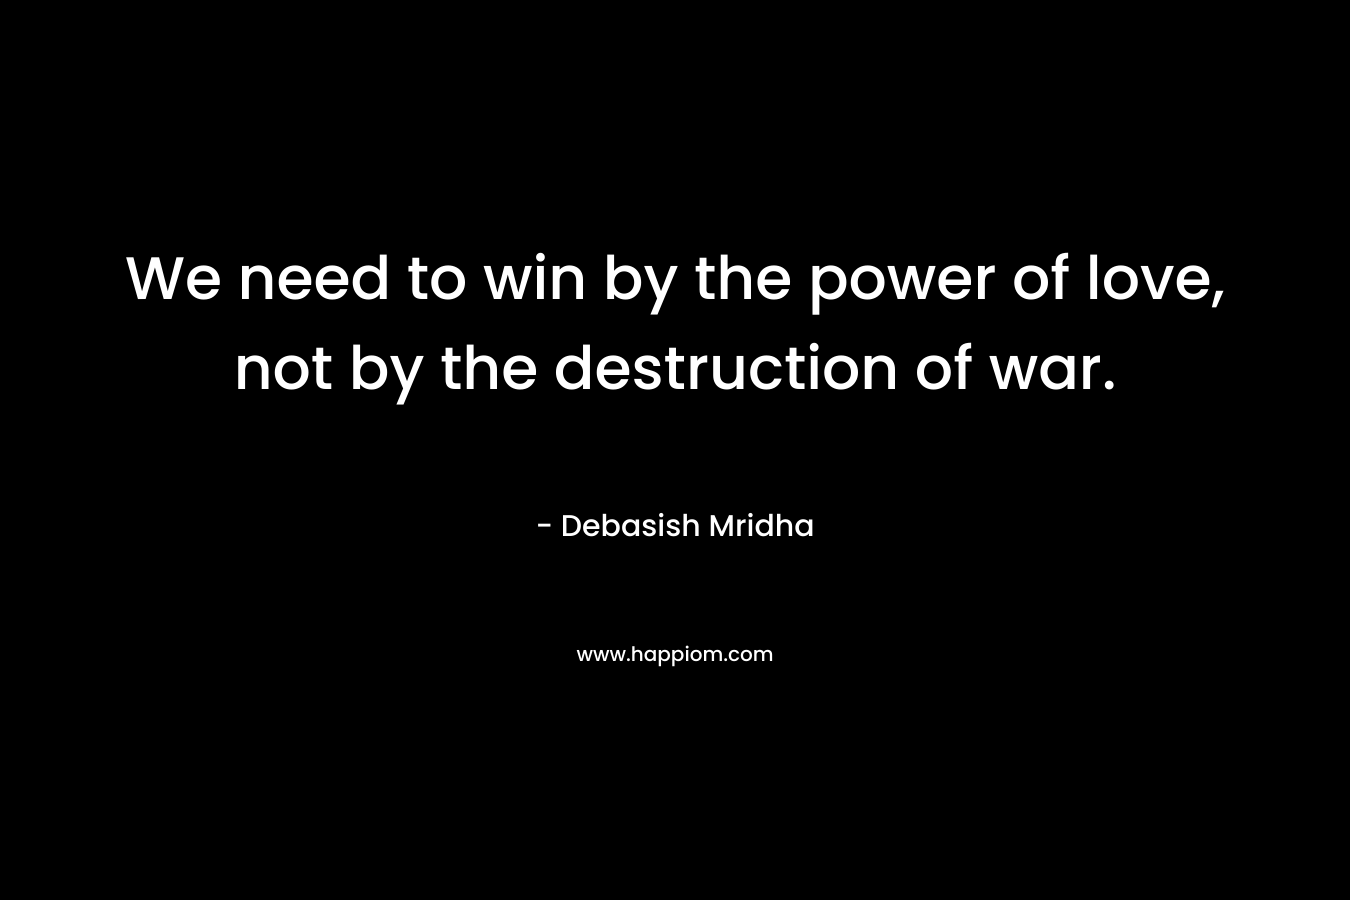 We need to win by the power of love, not by the destruction of war.